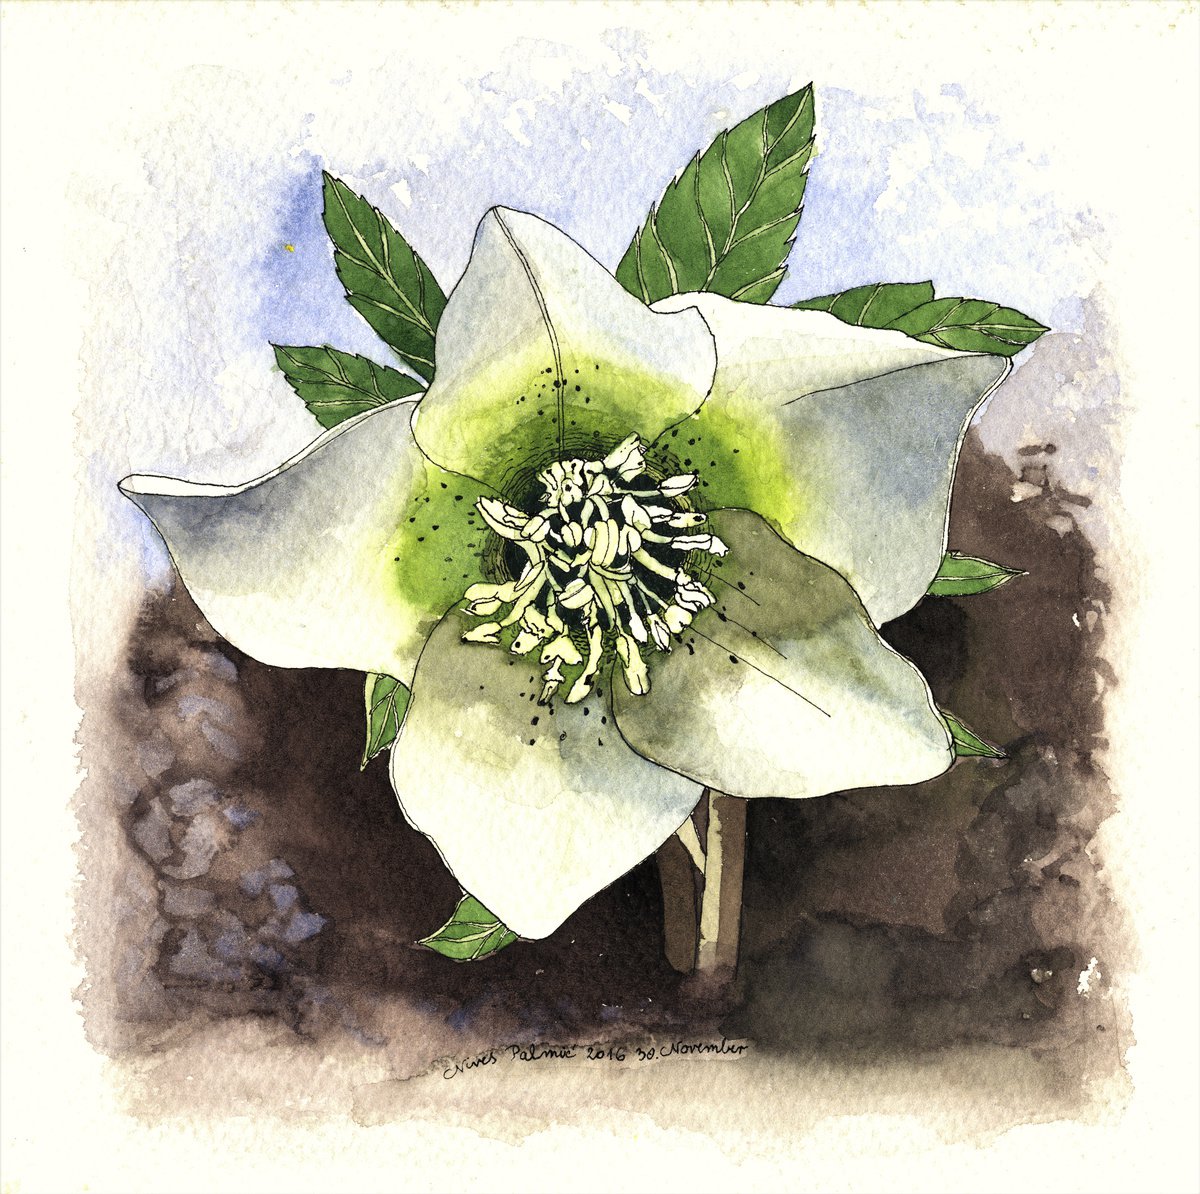 HELLEBORE by Nives Palmic